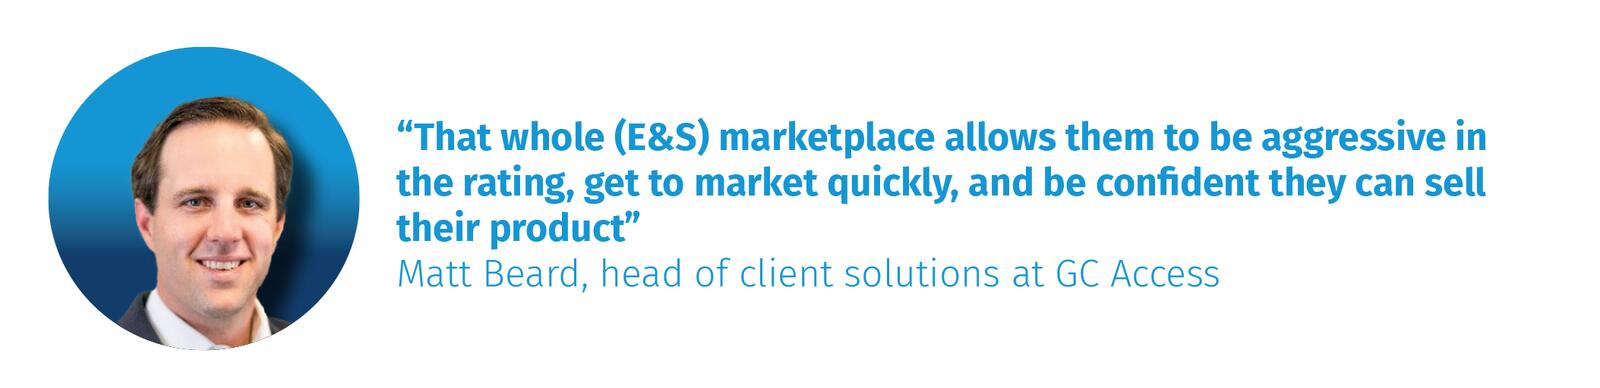 “That whole (E&S) marketplace allows them to be aggressive in the rating, get to market quickly, and be confident they can sell their product” Matt Beard, head of client solutions at GC Access